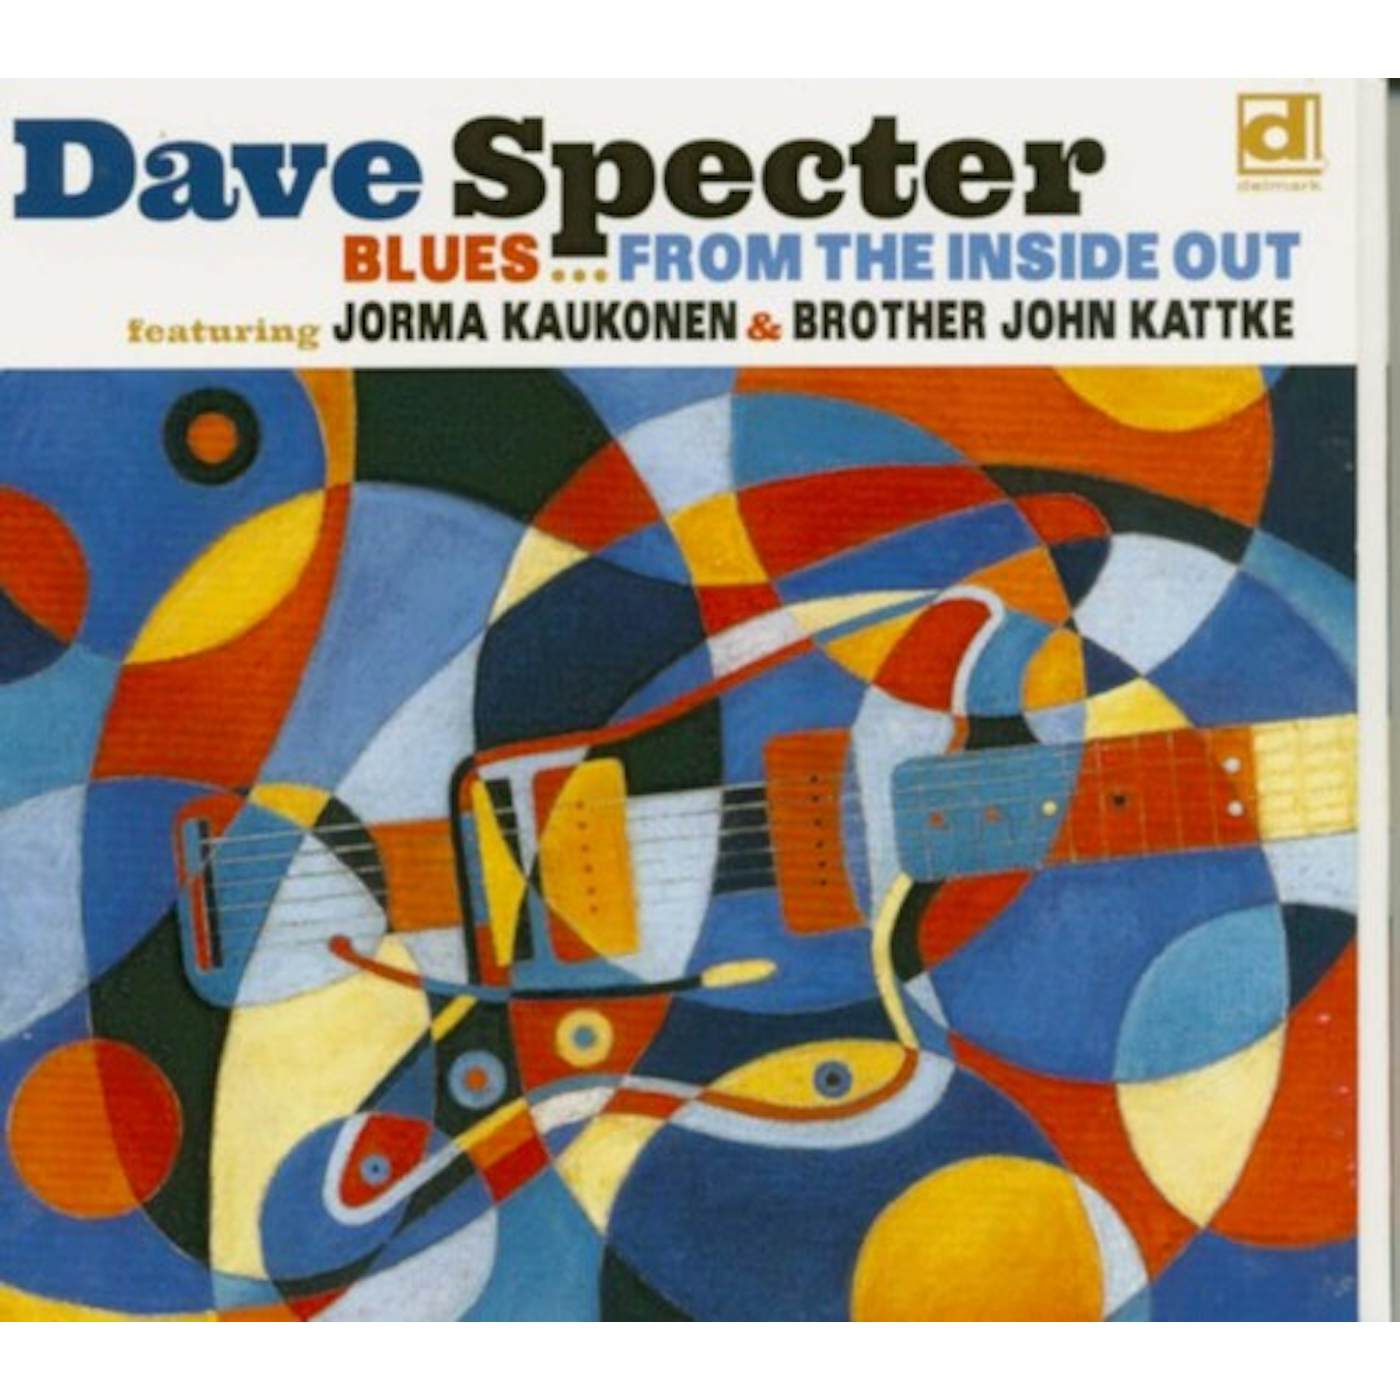 Dave Specter BLUES FROM THE INSIDE OUT CD